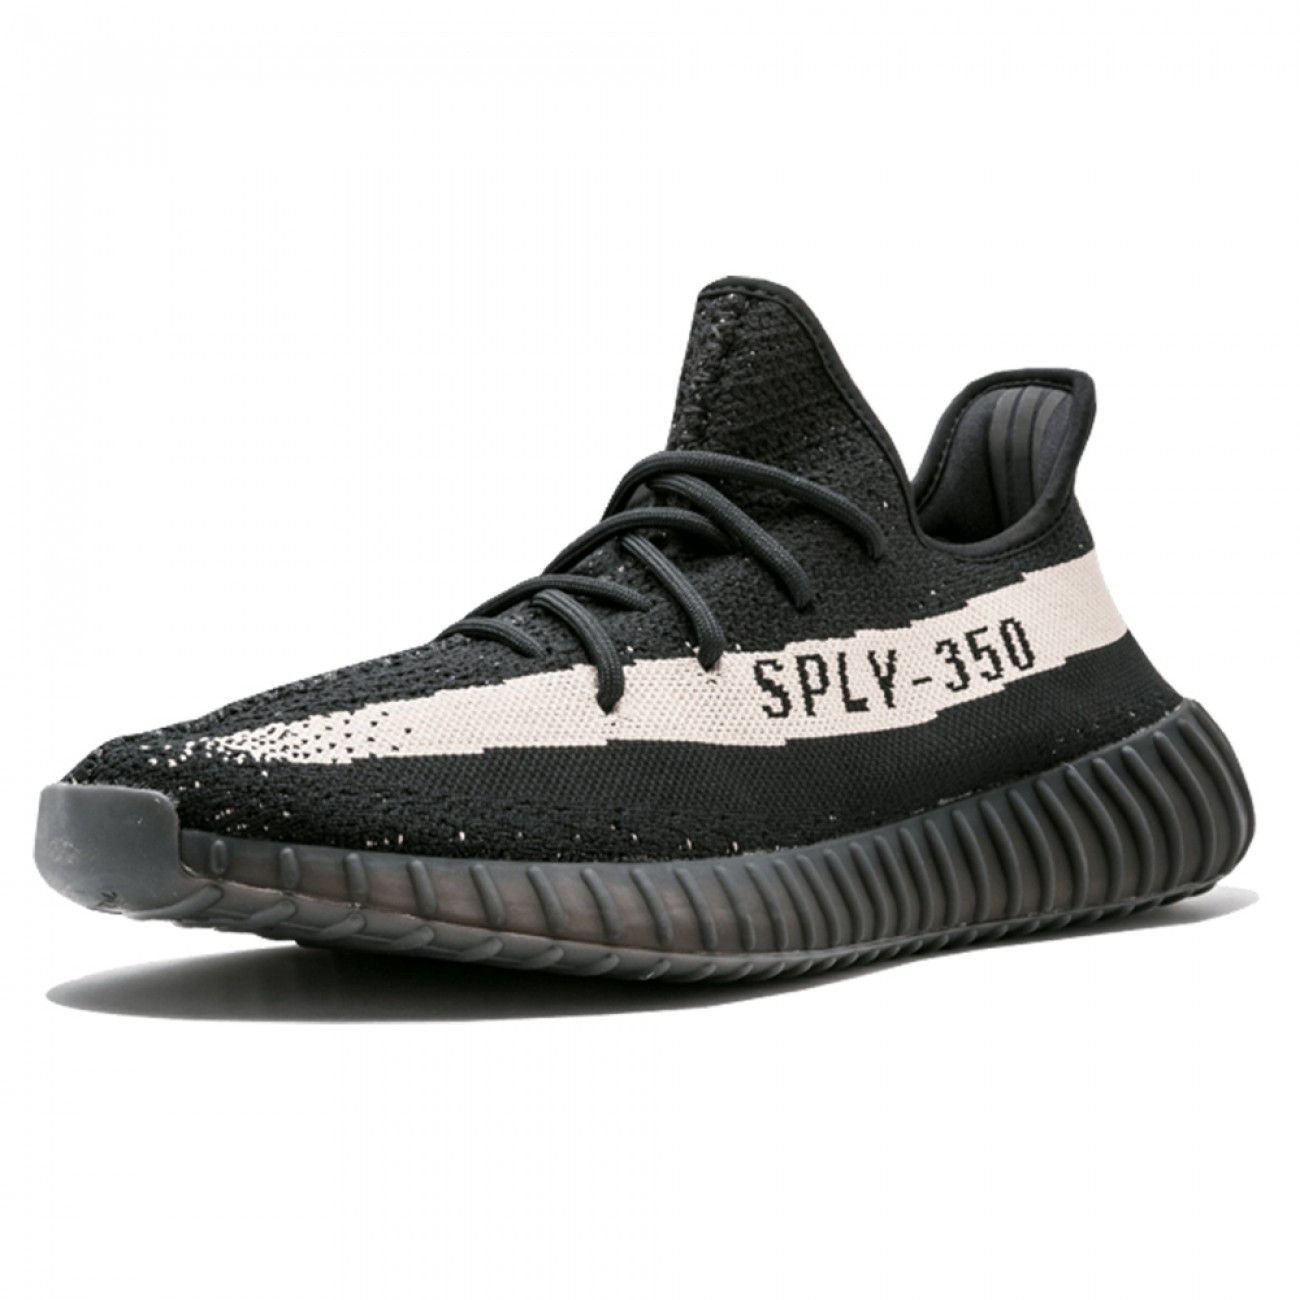 Adidas Yeezy Boost 350 V2 Pirate Black / Bred Review and